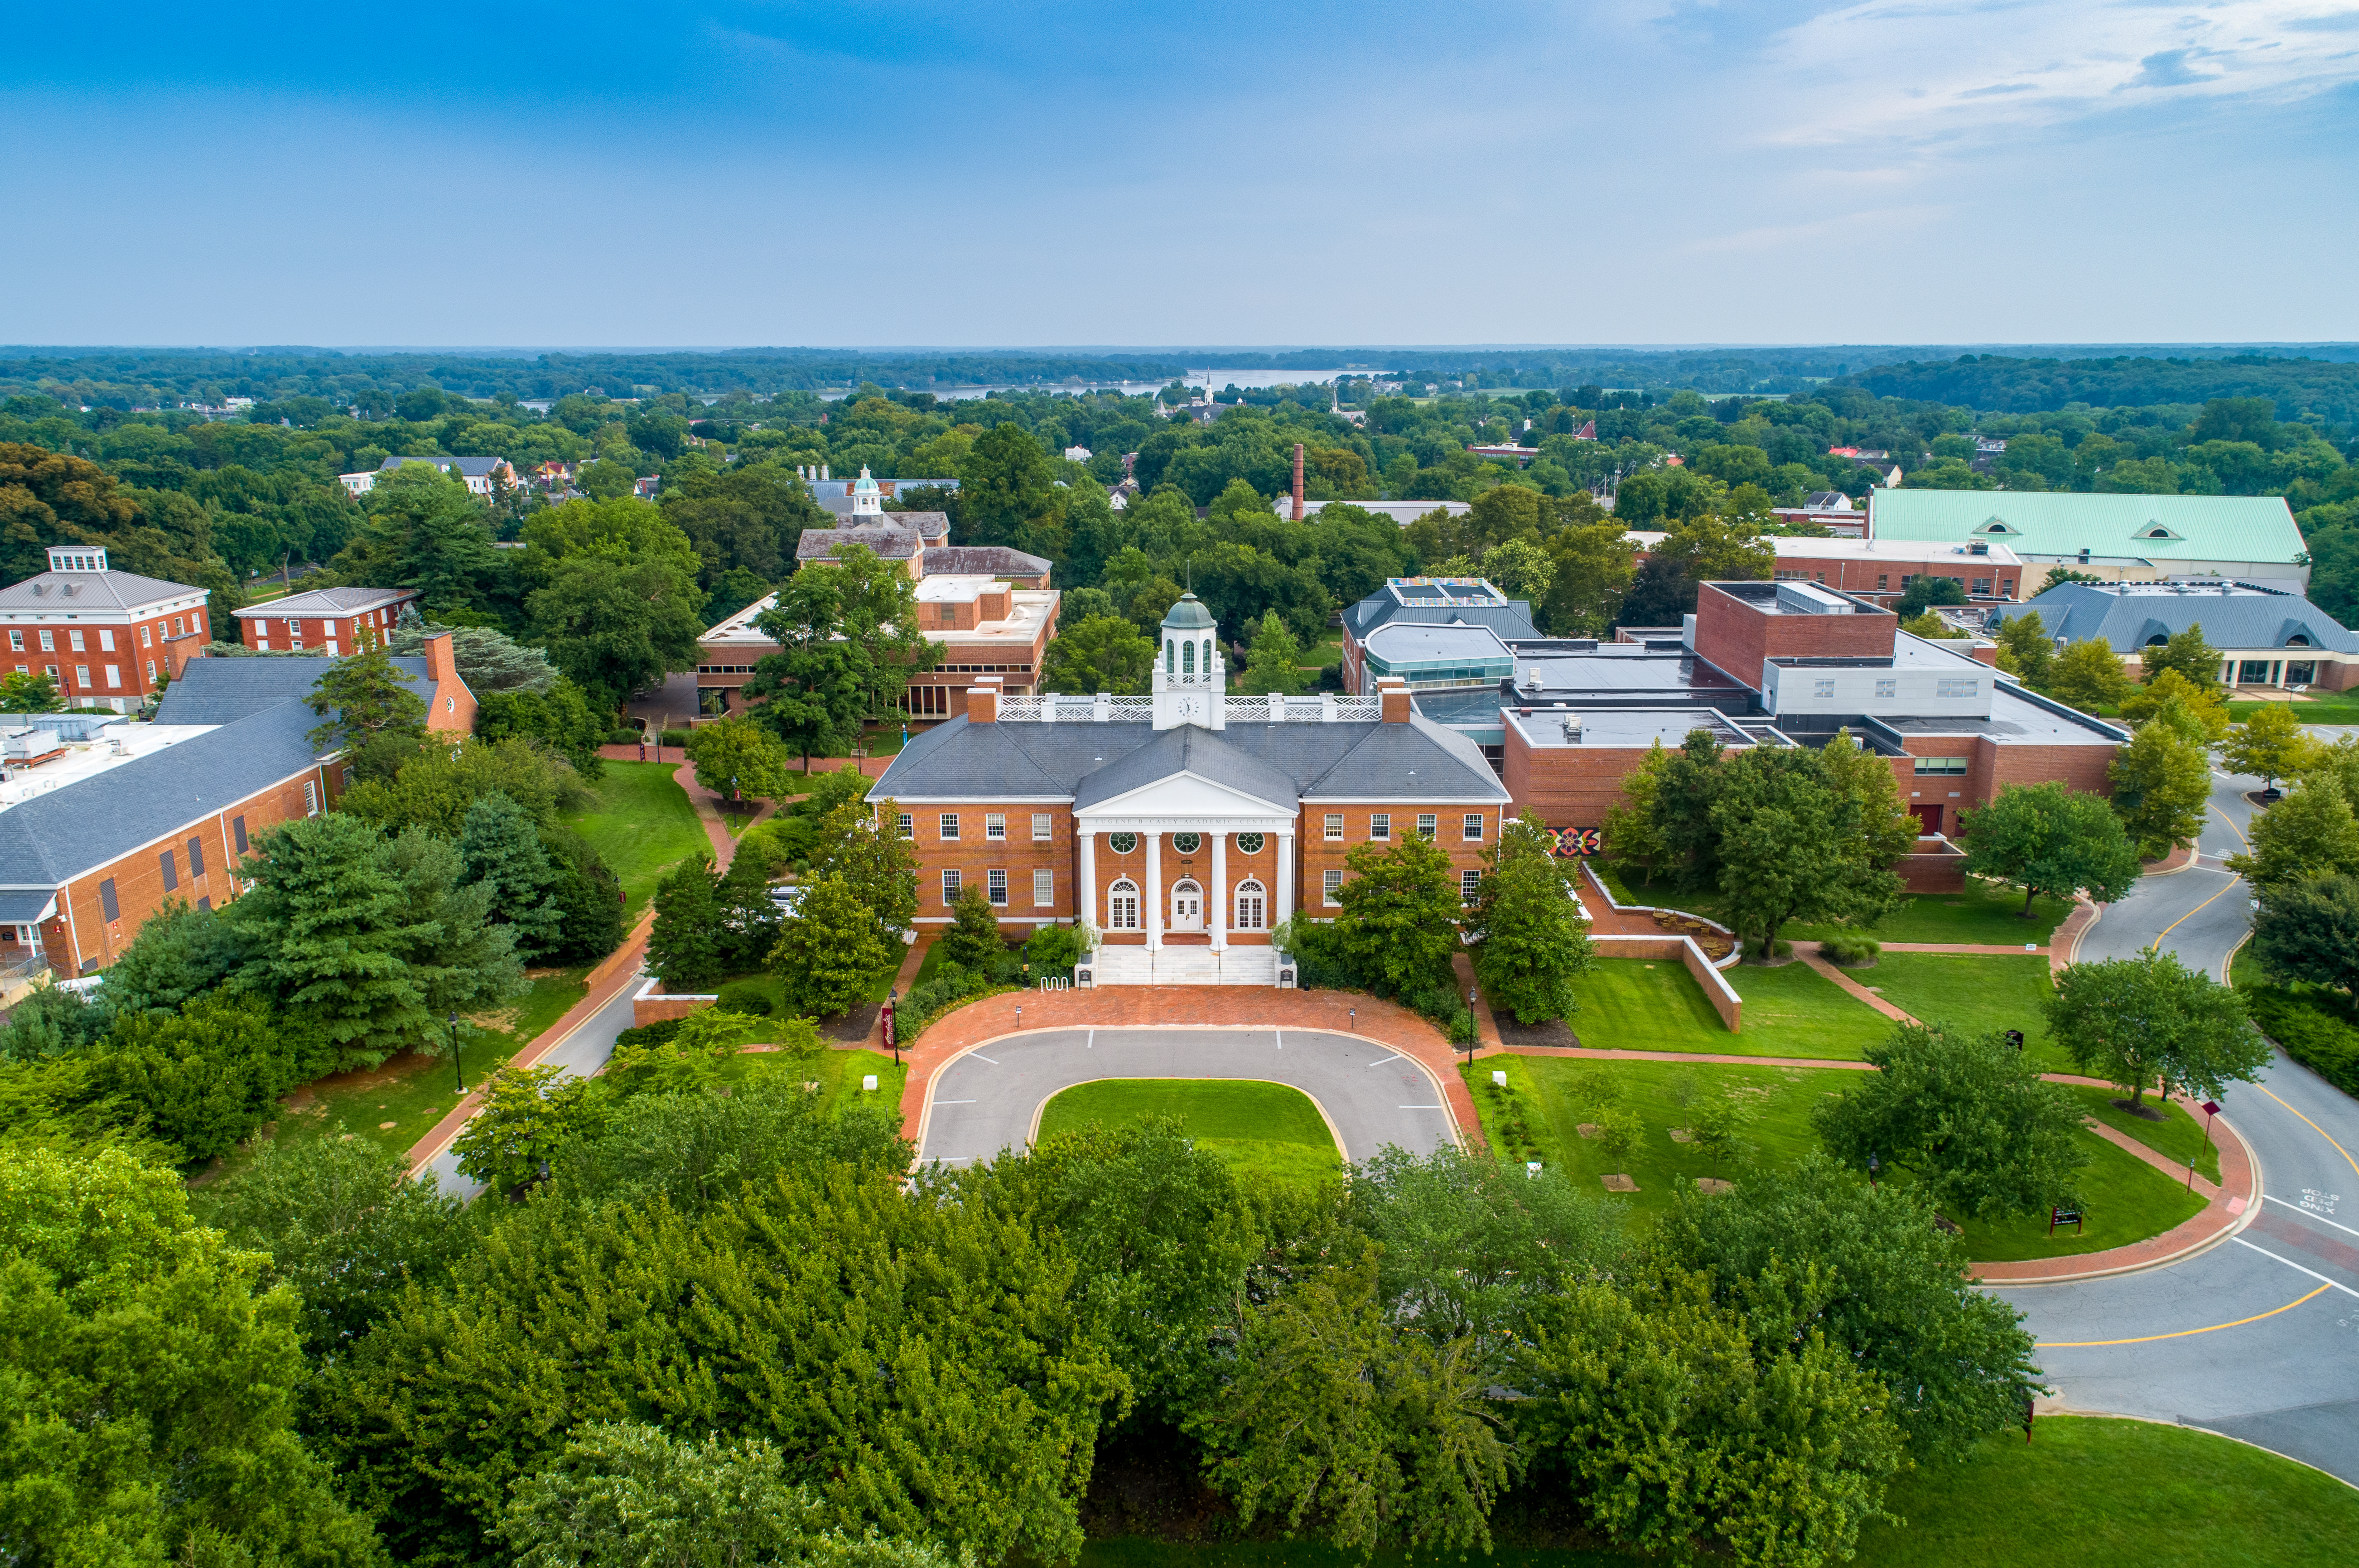 Drone photo of the Washington College campus